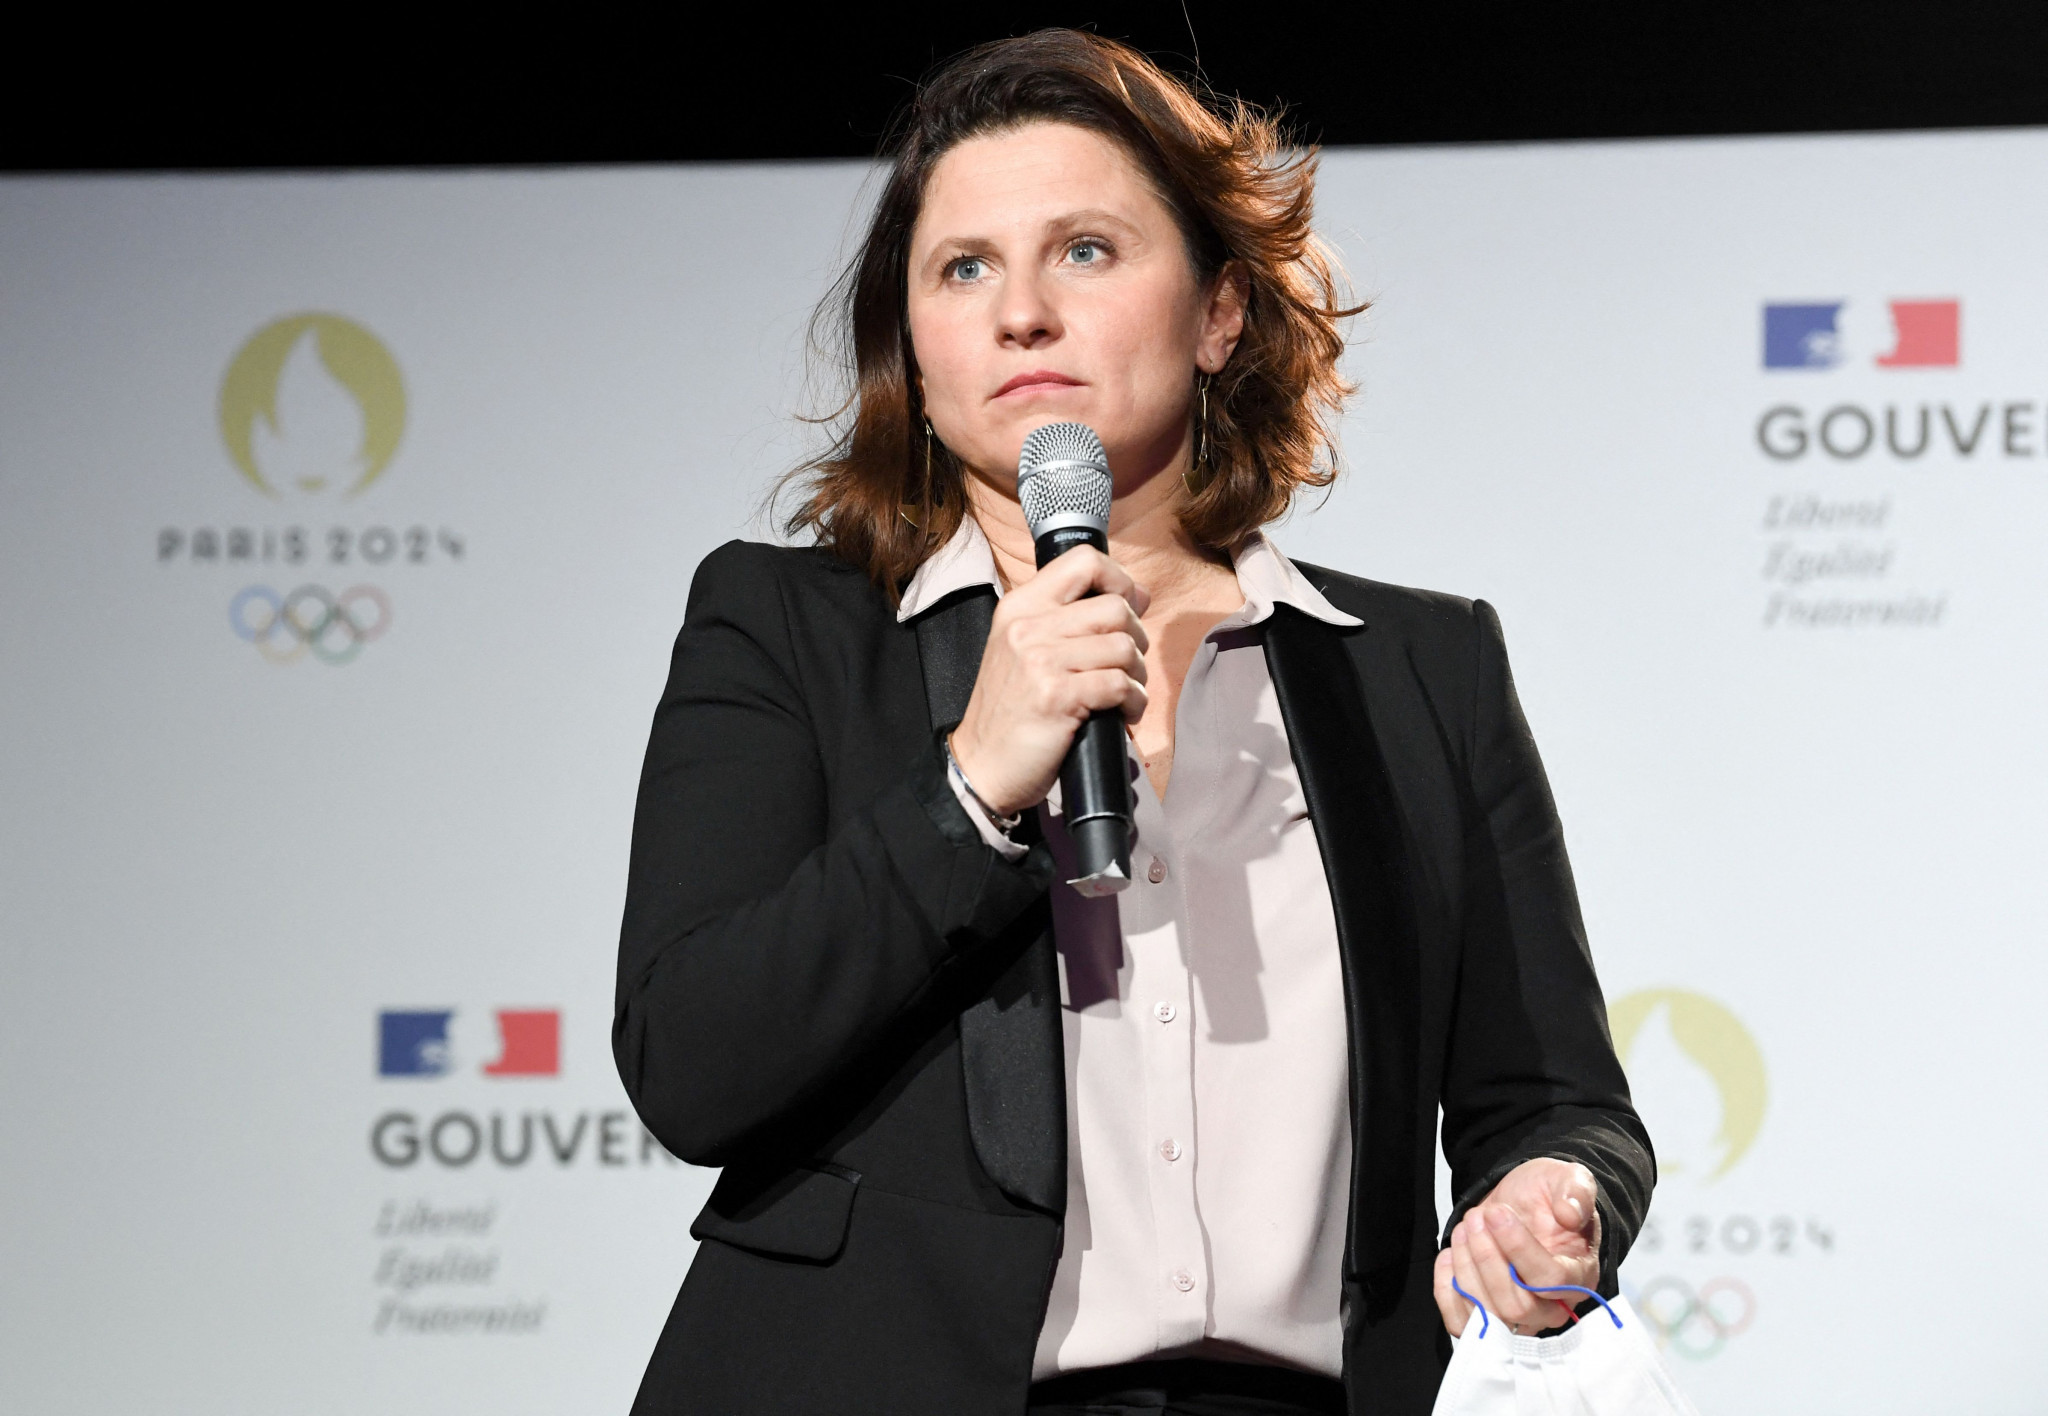 French Sports Minister Roxana Mărăcineanu has tested positive for COVID-19 and will be unable to travel to Beijing 2022 ©Getty Images